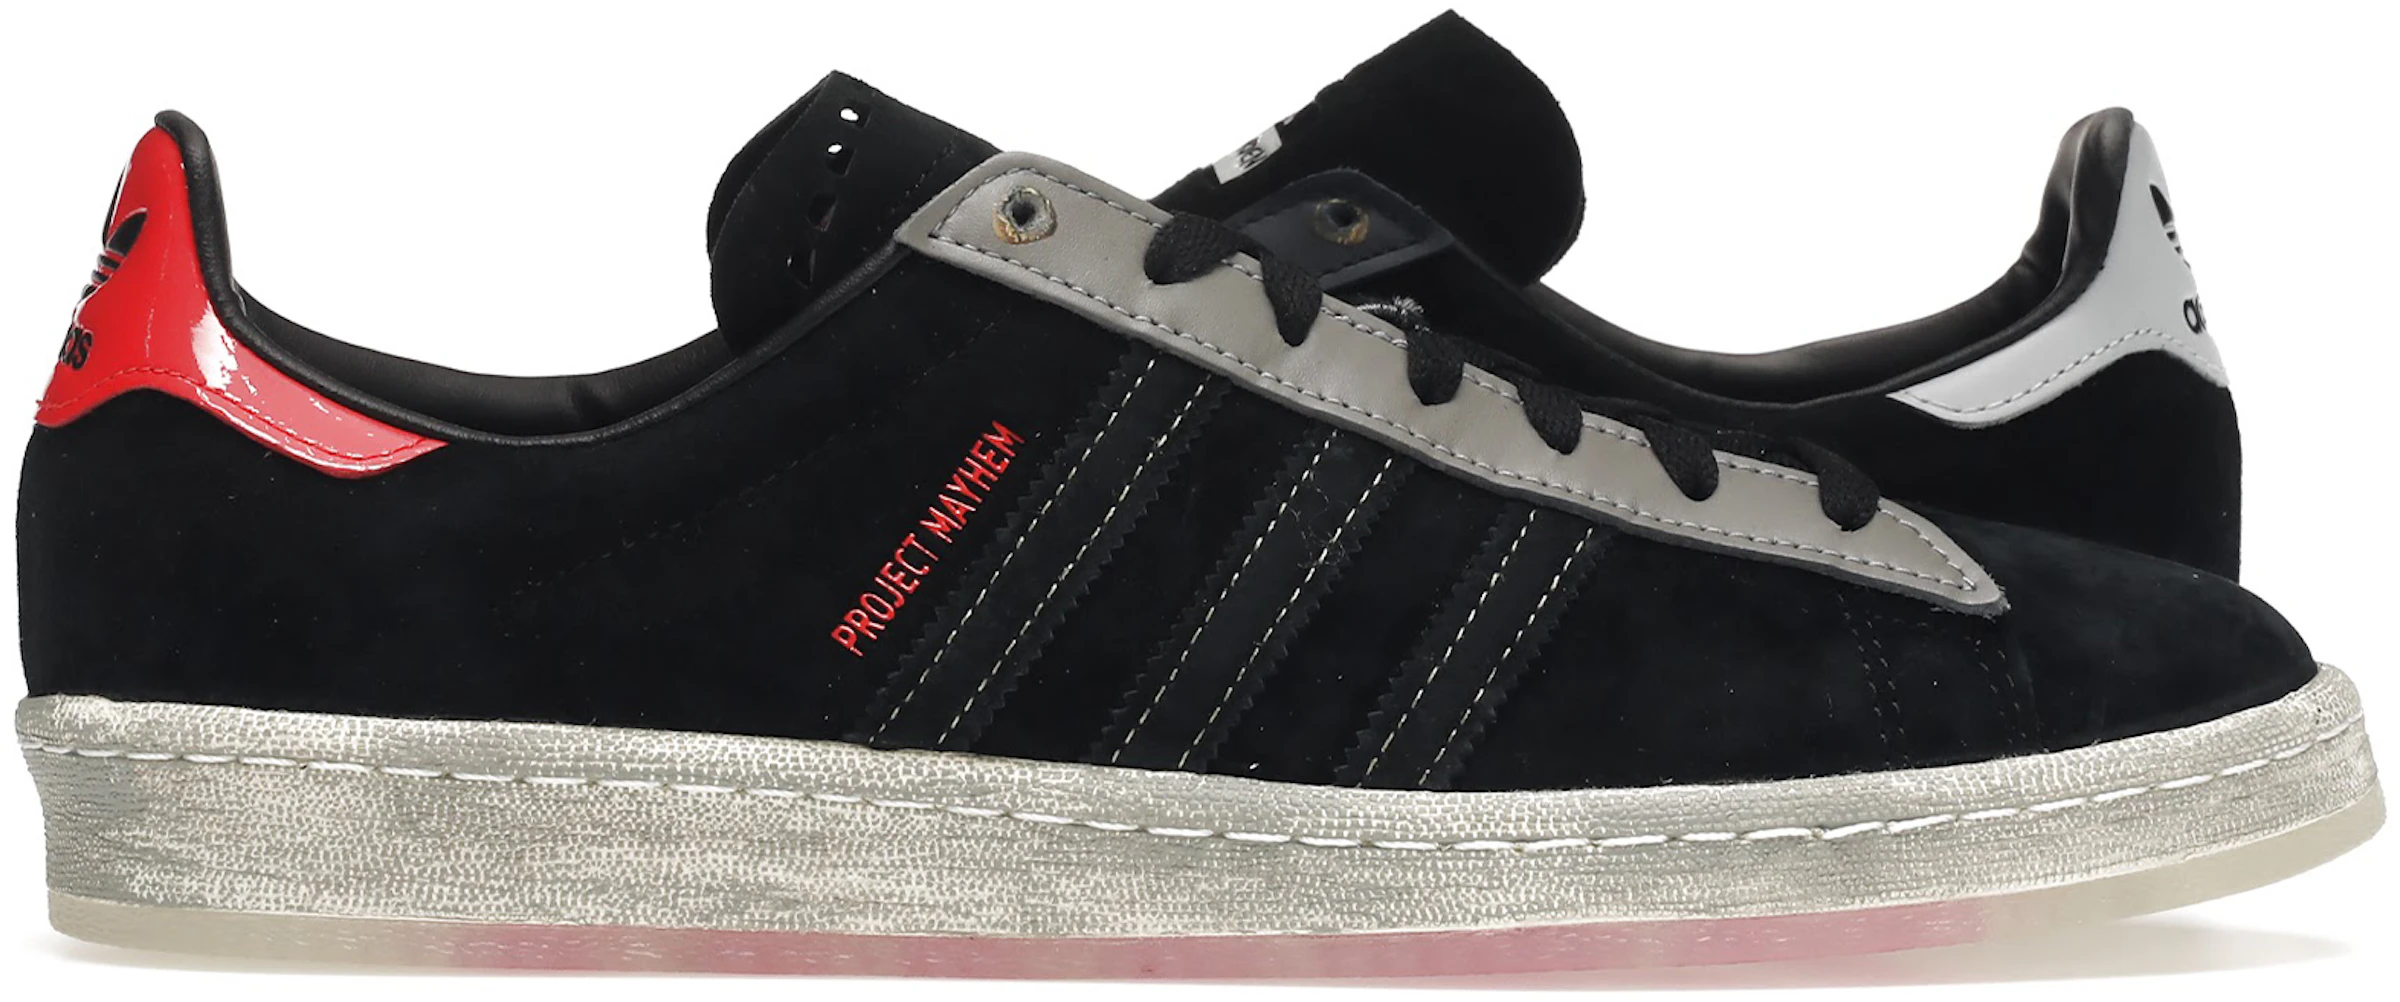 adidas Campus 80s size? Fight Club - GY3890 - US